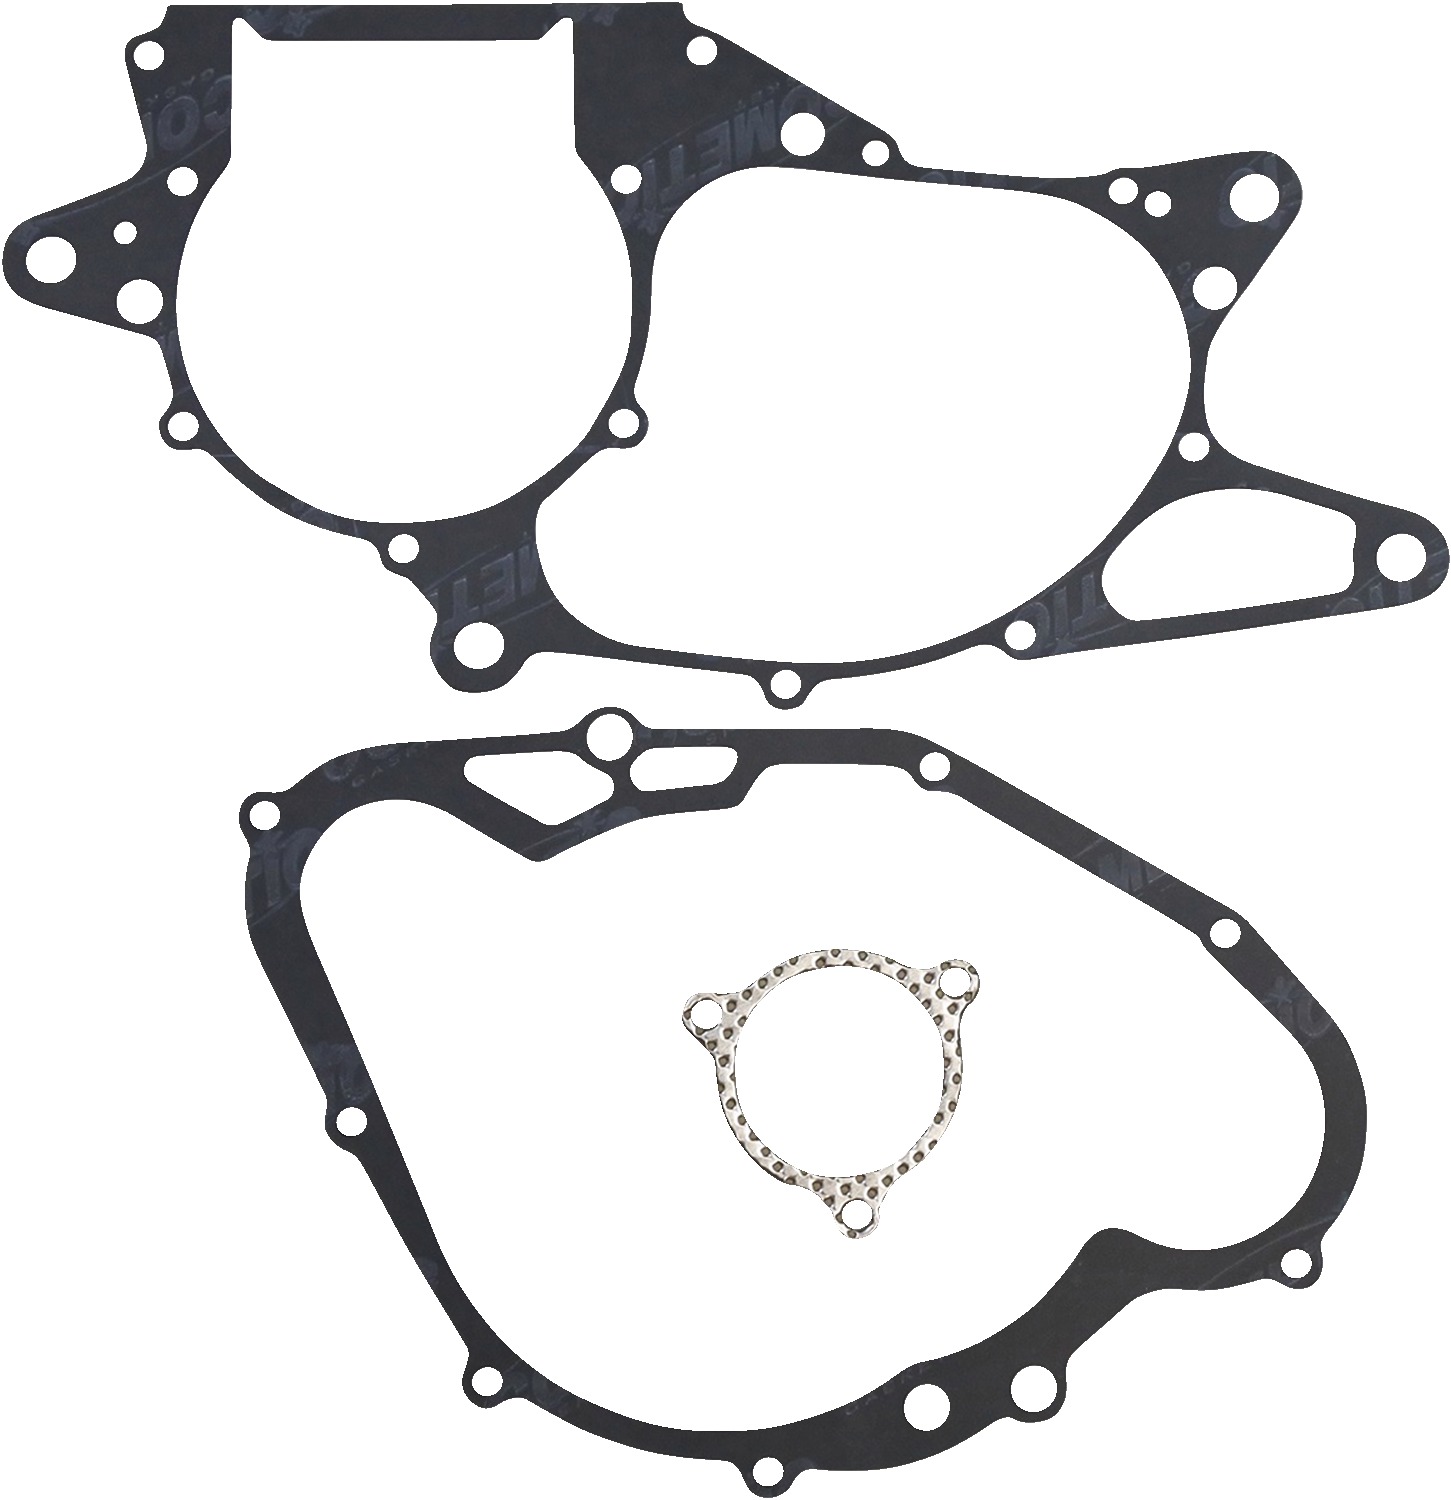 Lower Engine Gasket Kit - For 78-80 Honda CR250R - Click Image to Close